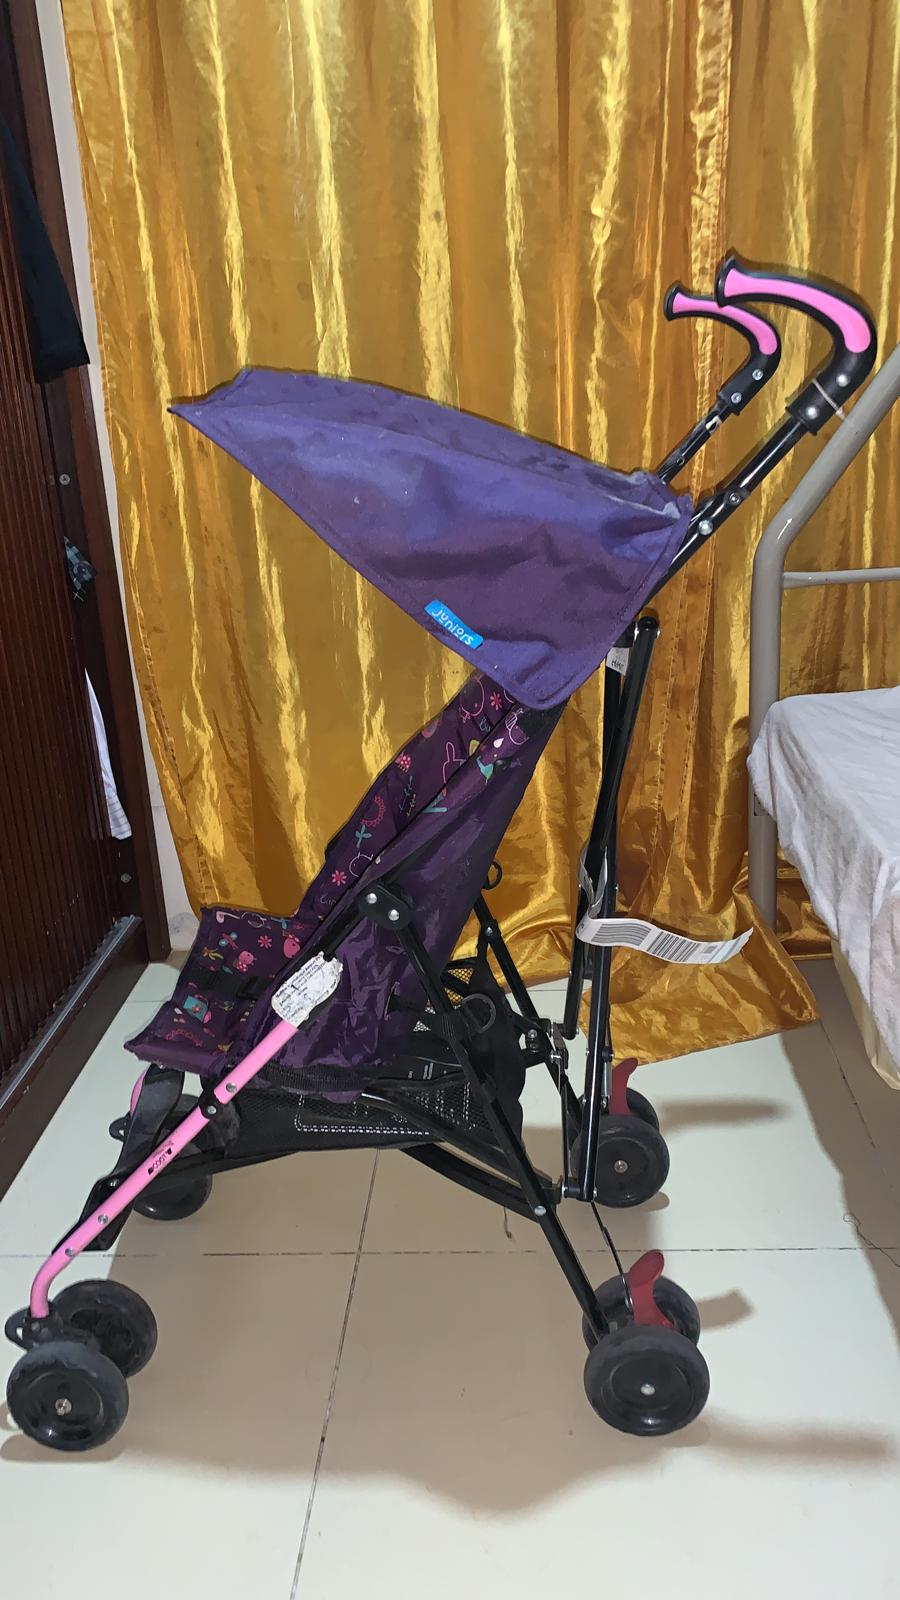 Juniors Baby Stroller in very good condition